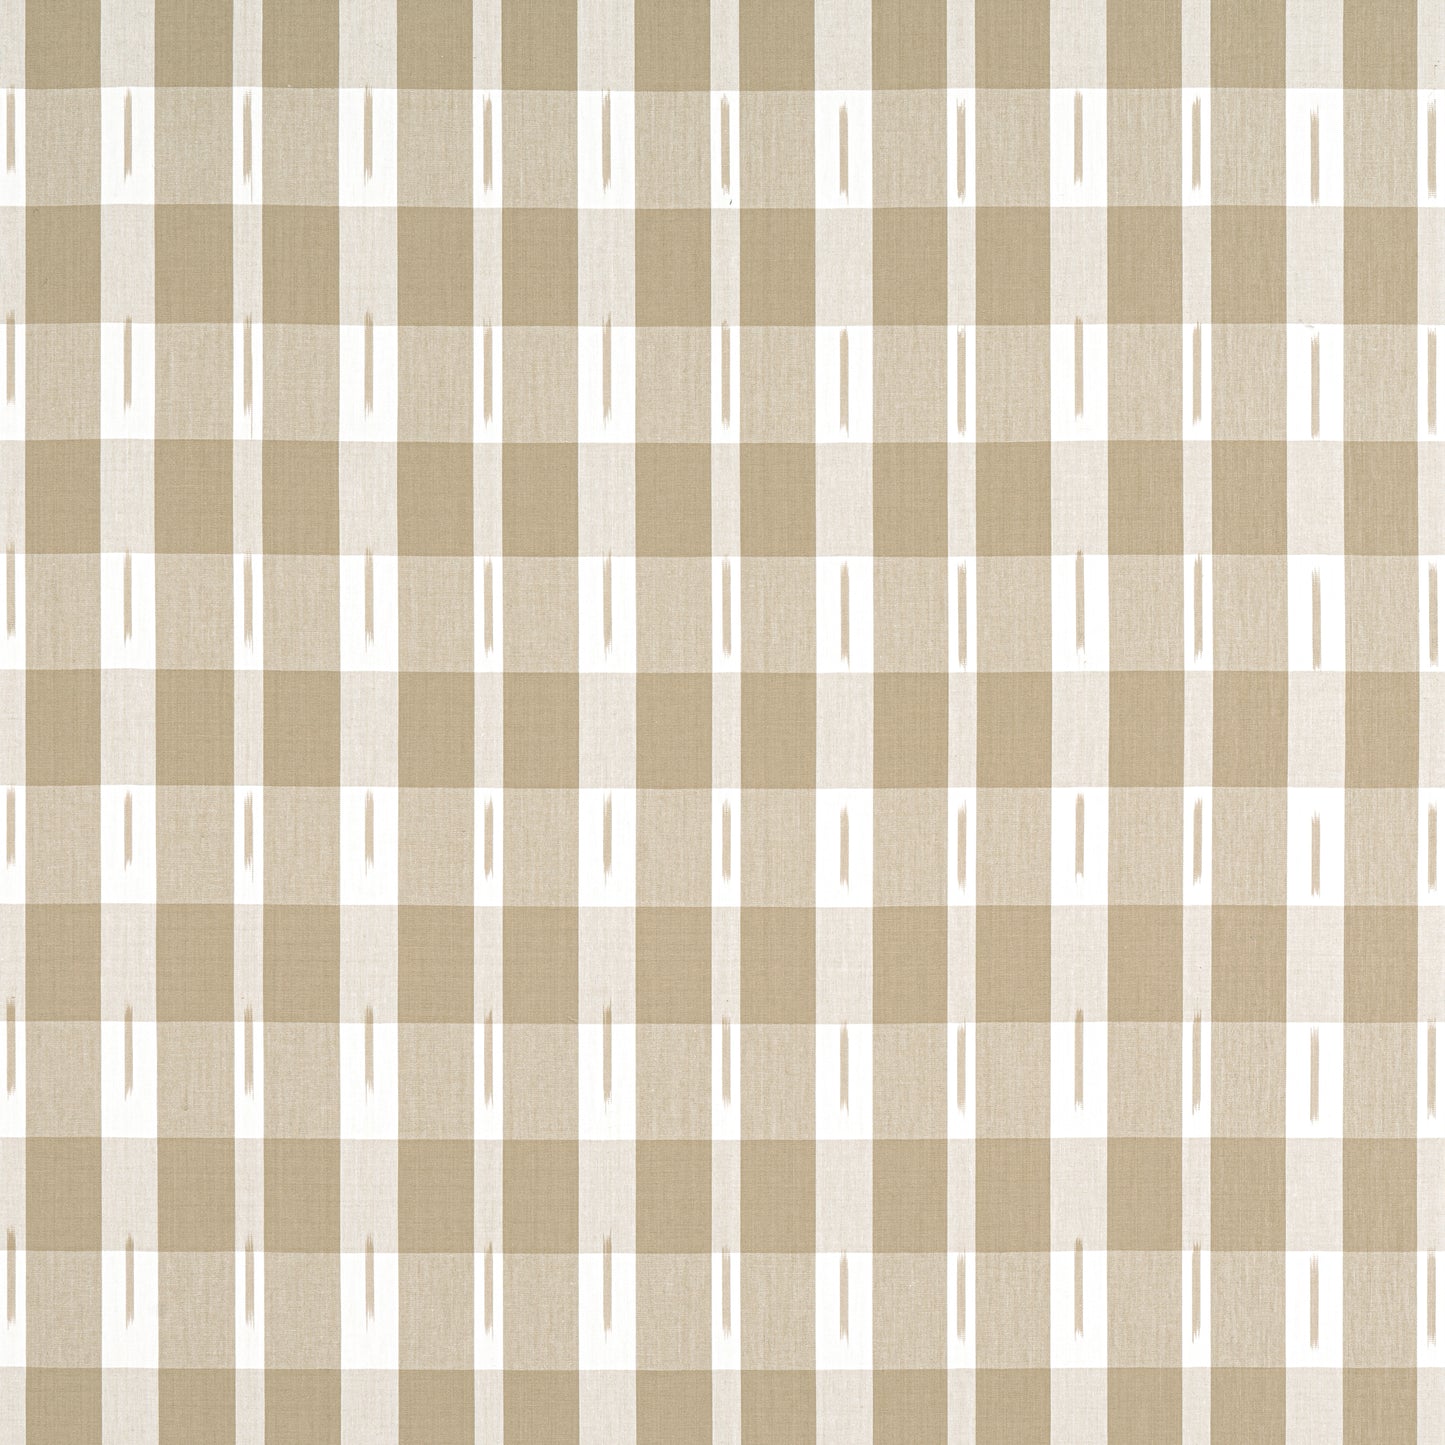 Purchase Thibaut Fabric Pattern# W736441 pattern name Ellagrey Check color Beige